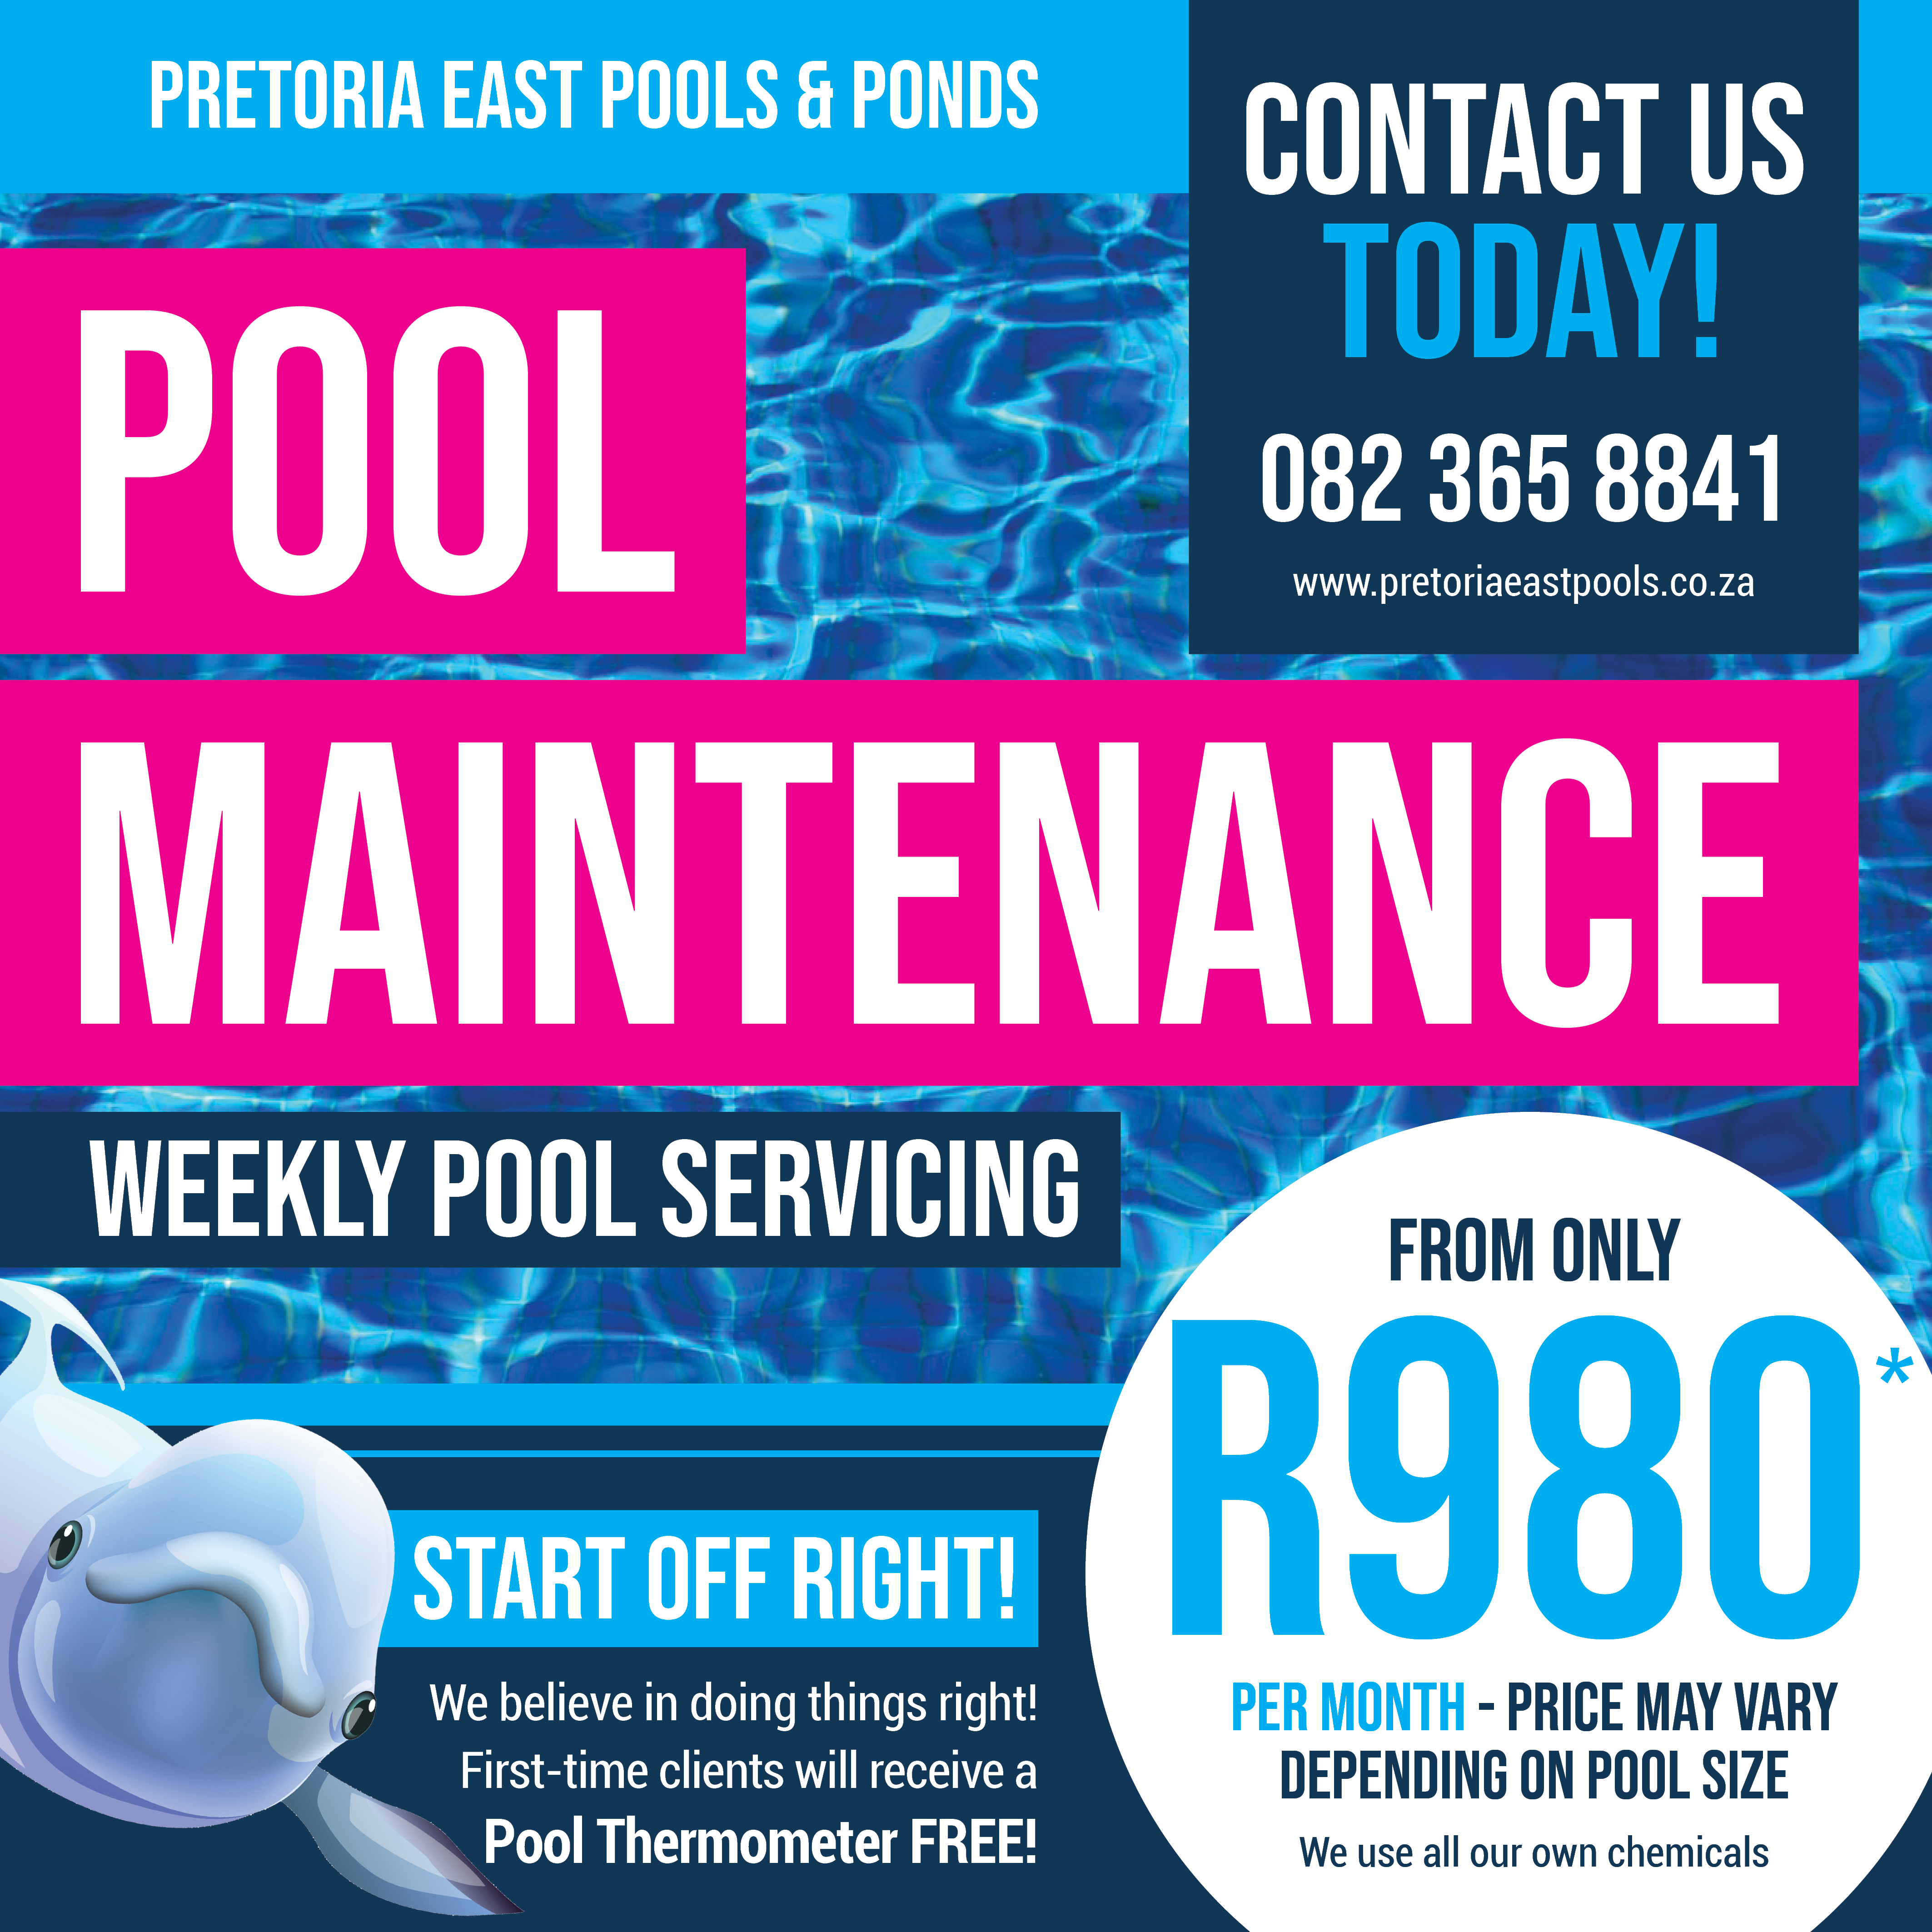 Our pool maintenance offer